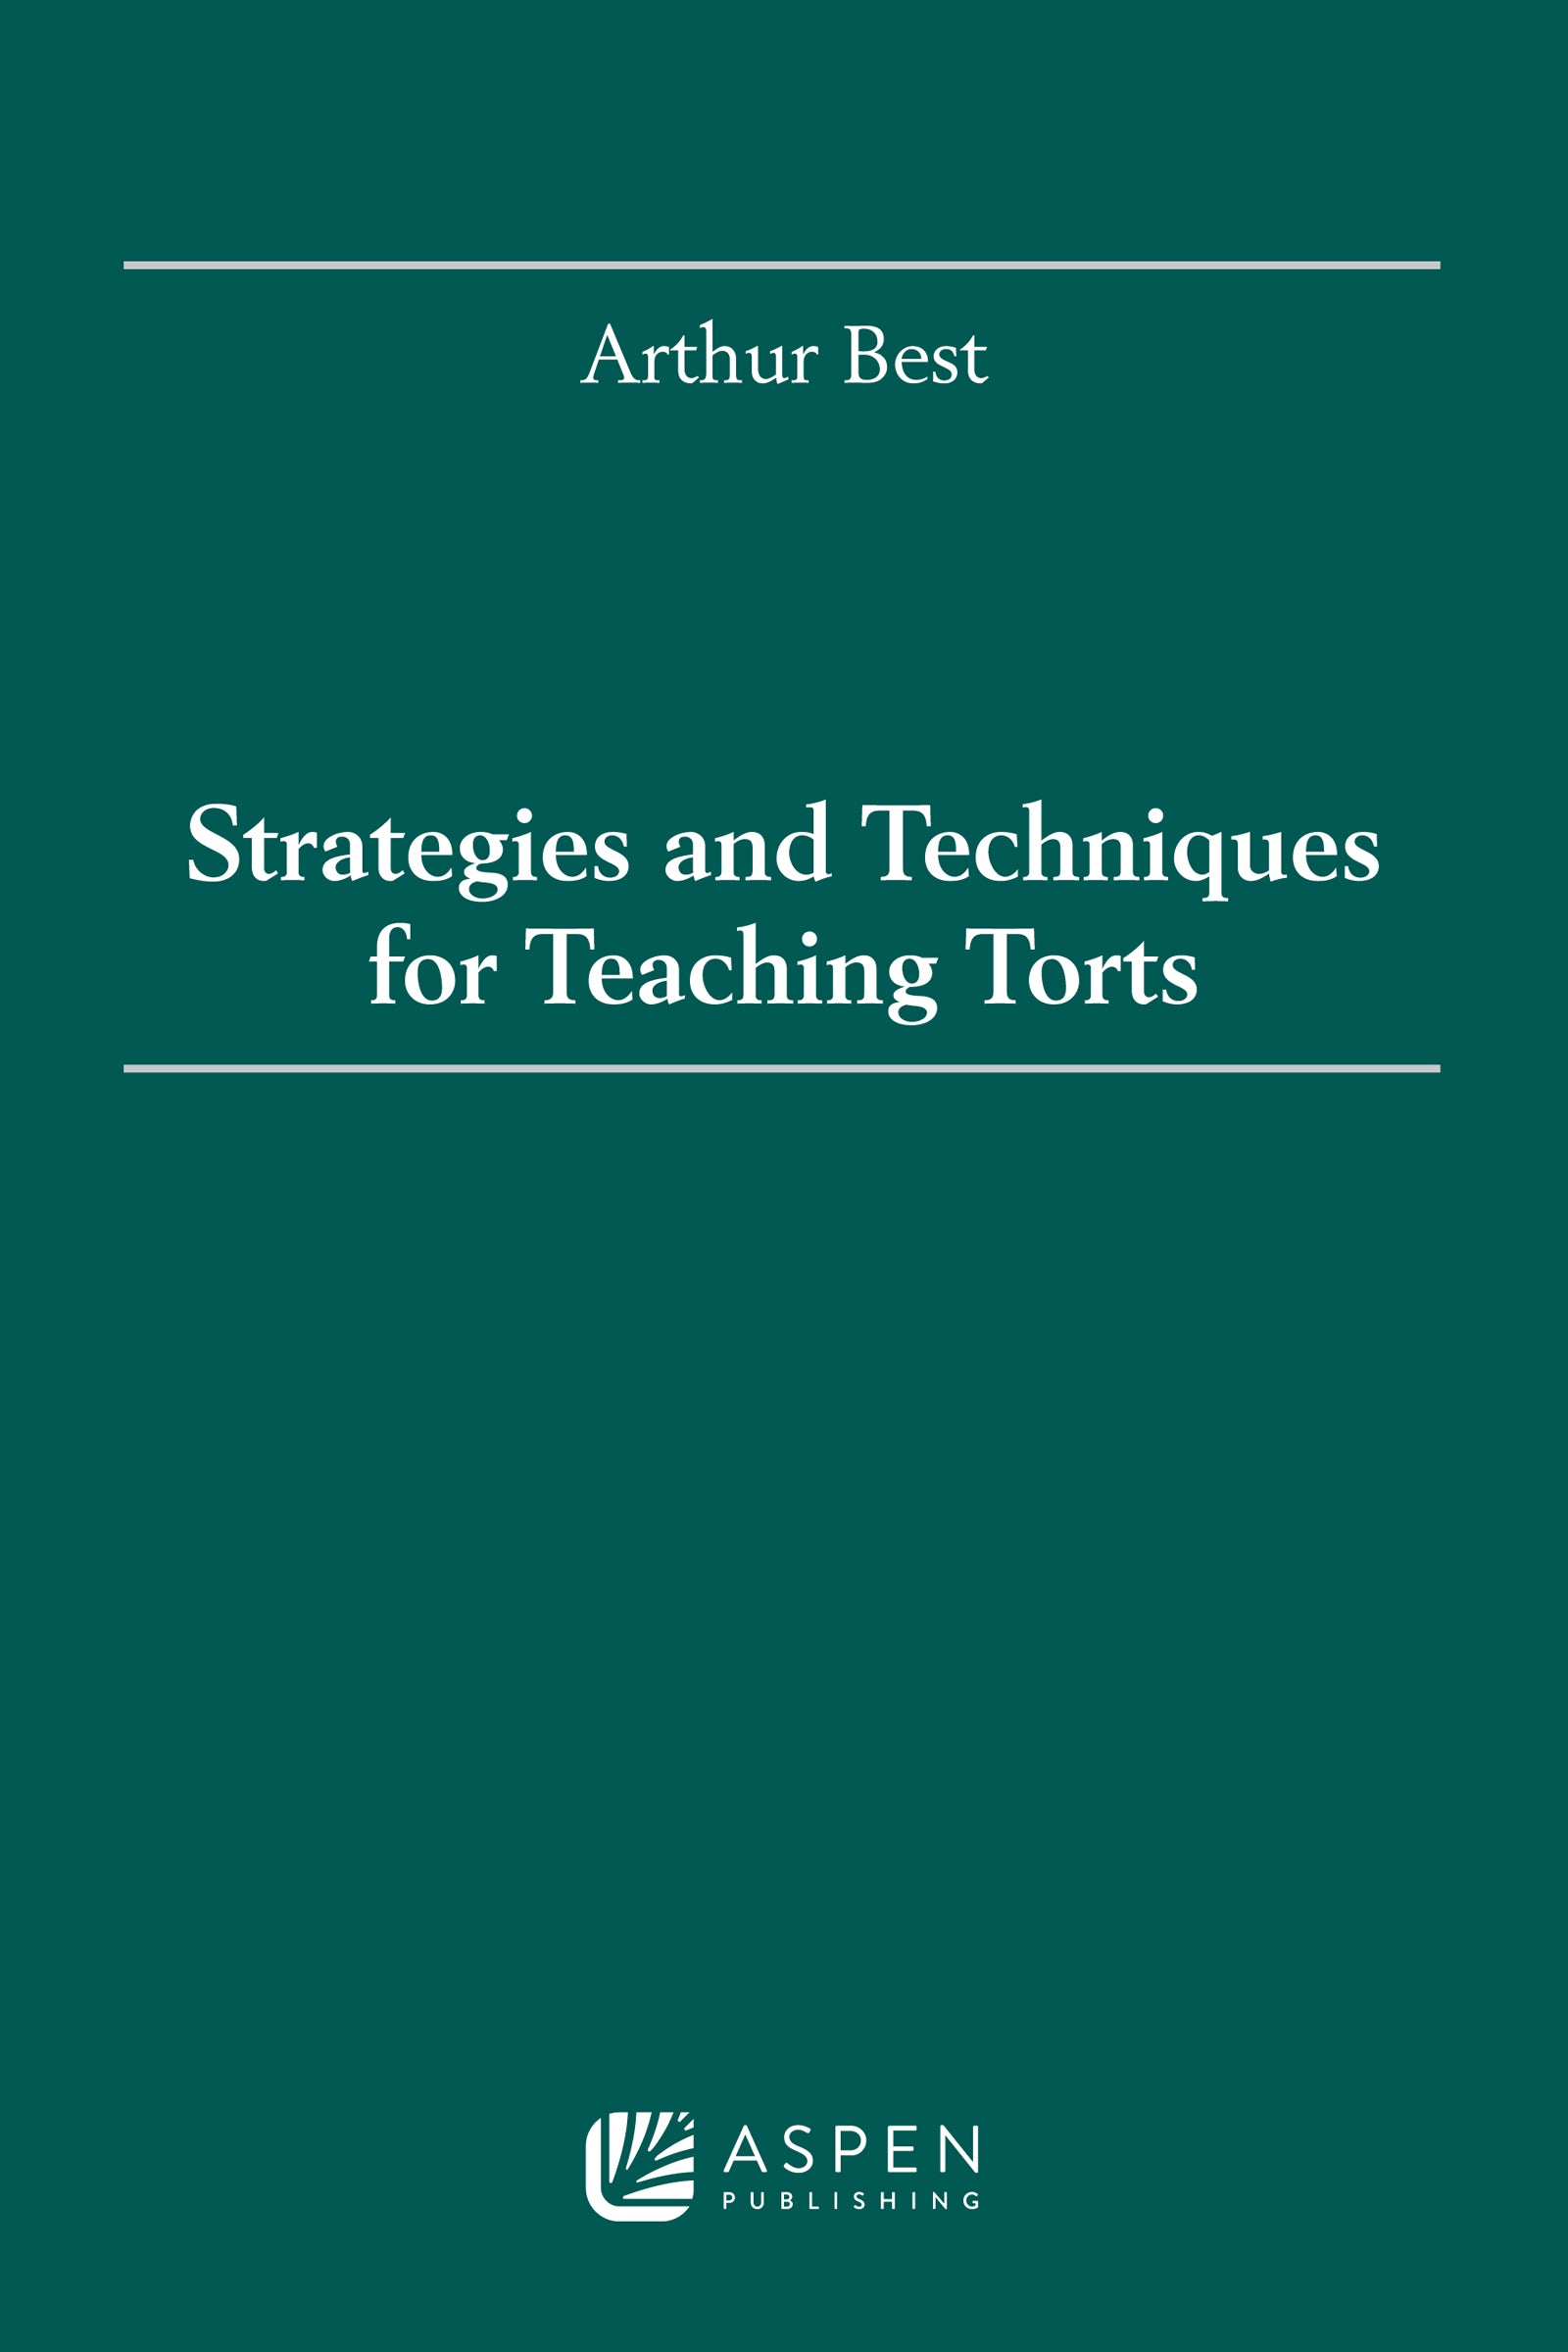 Strategies and Techniques for Teaching Torts